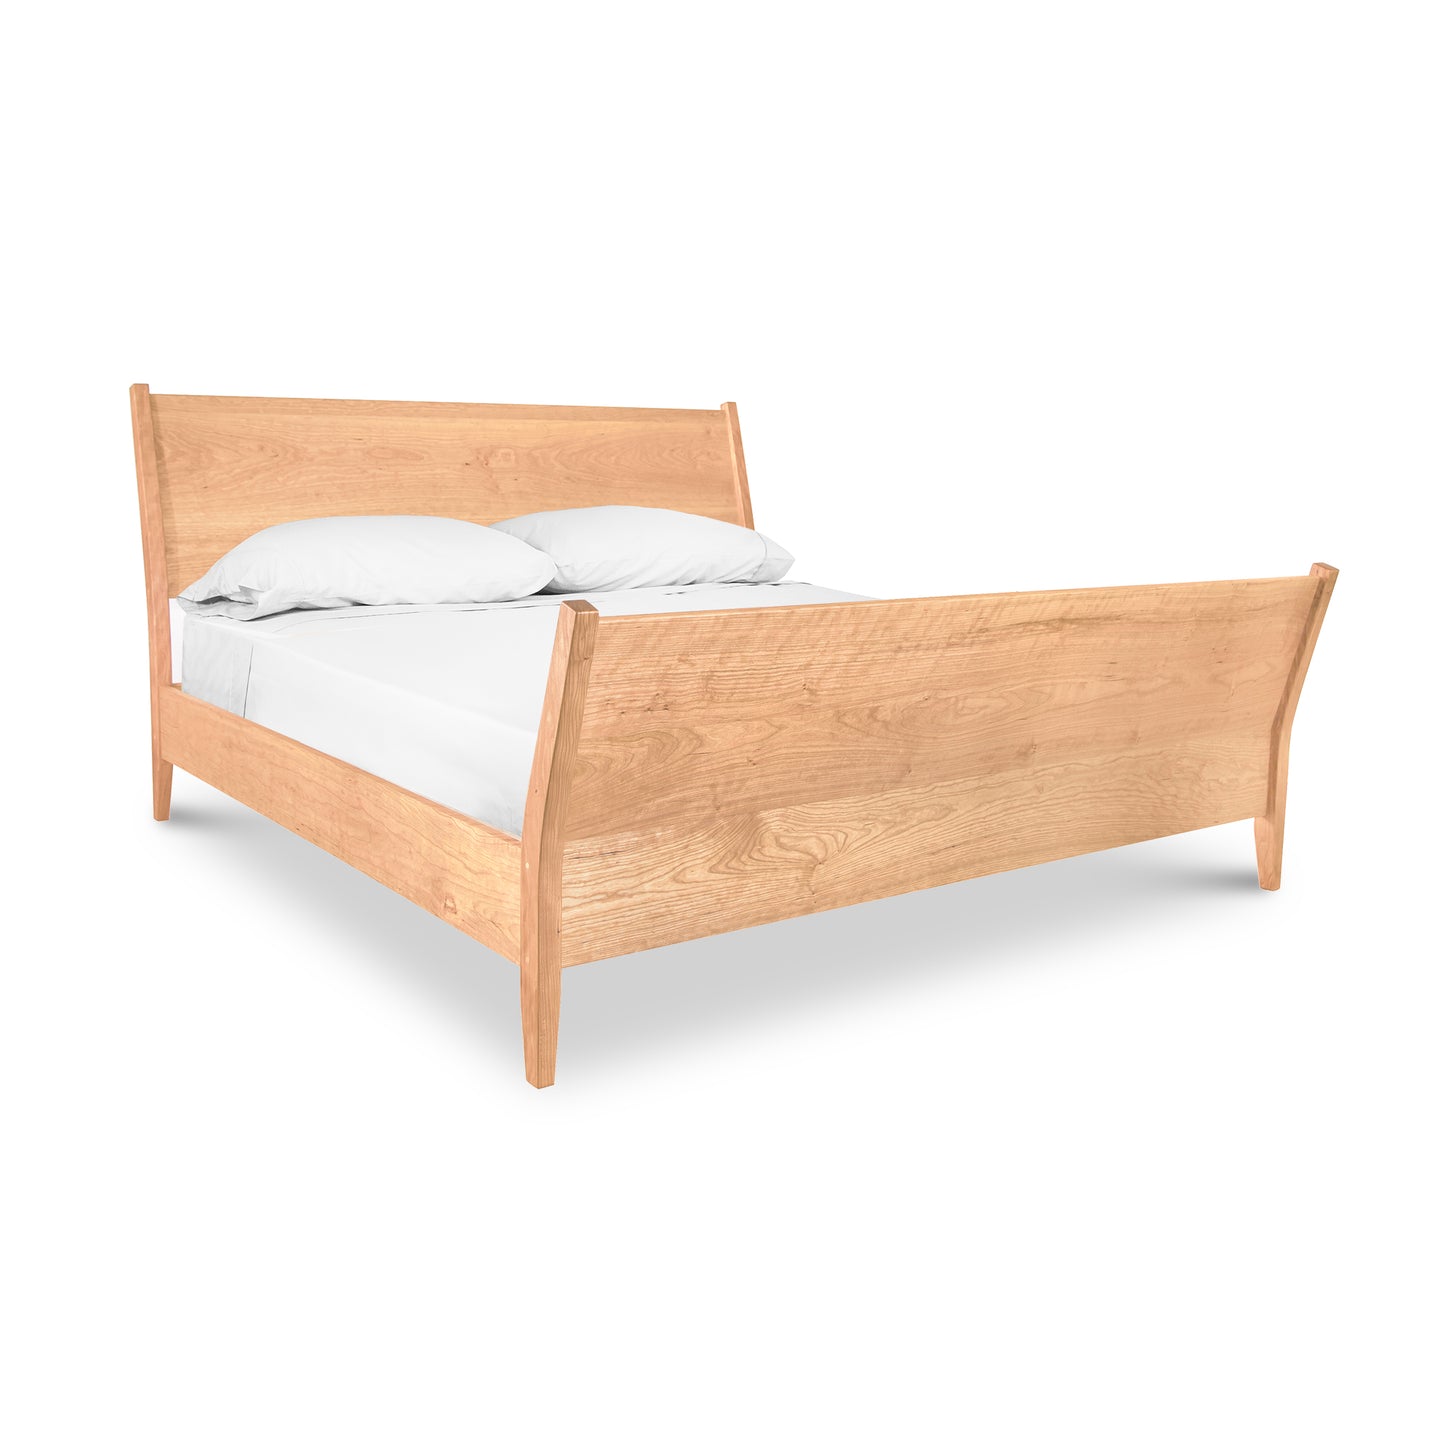 Maple Corner Woodworks Andover Modern Incline Sleigh Bed frame with a simple design, featuring two pillows and a white sheet, isolated on a white background.